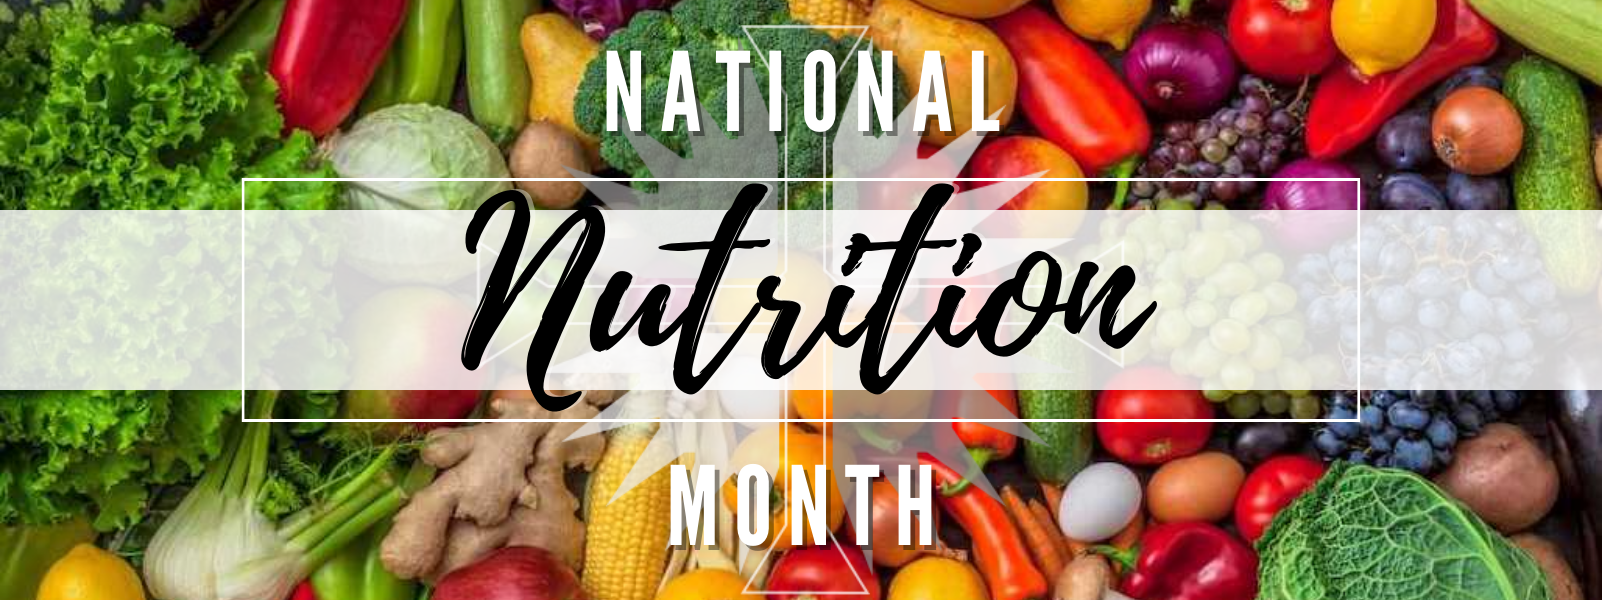 Nourishing Lives During National Nutrition Month